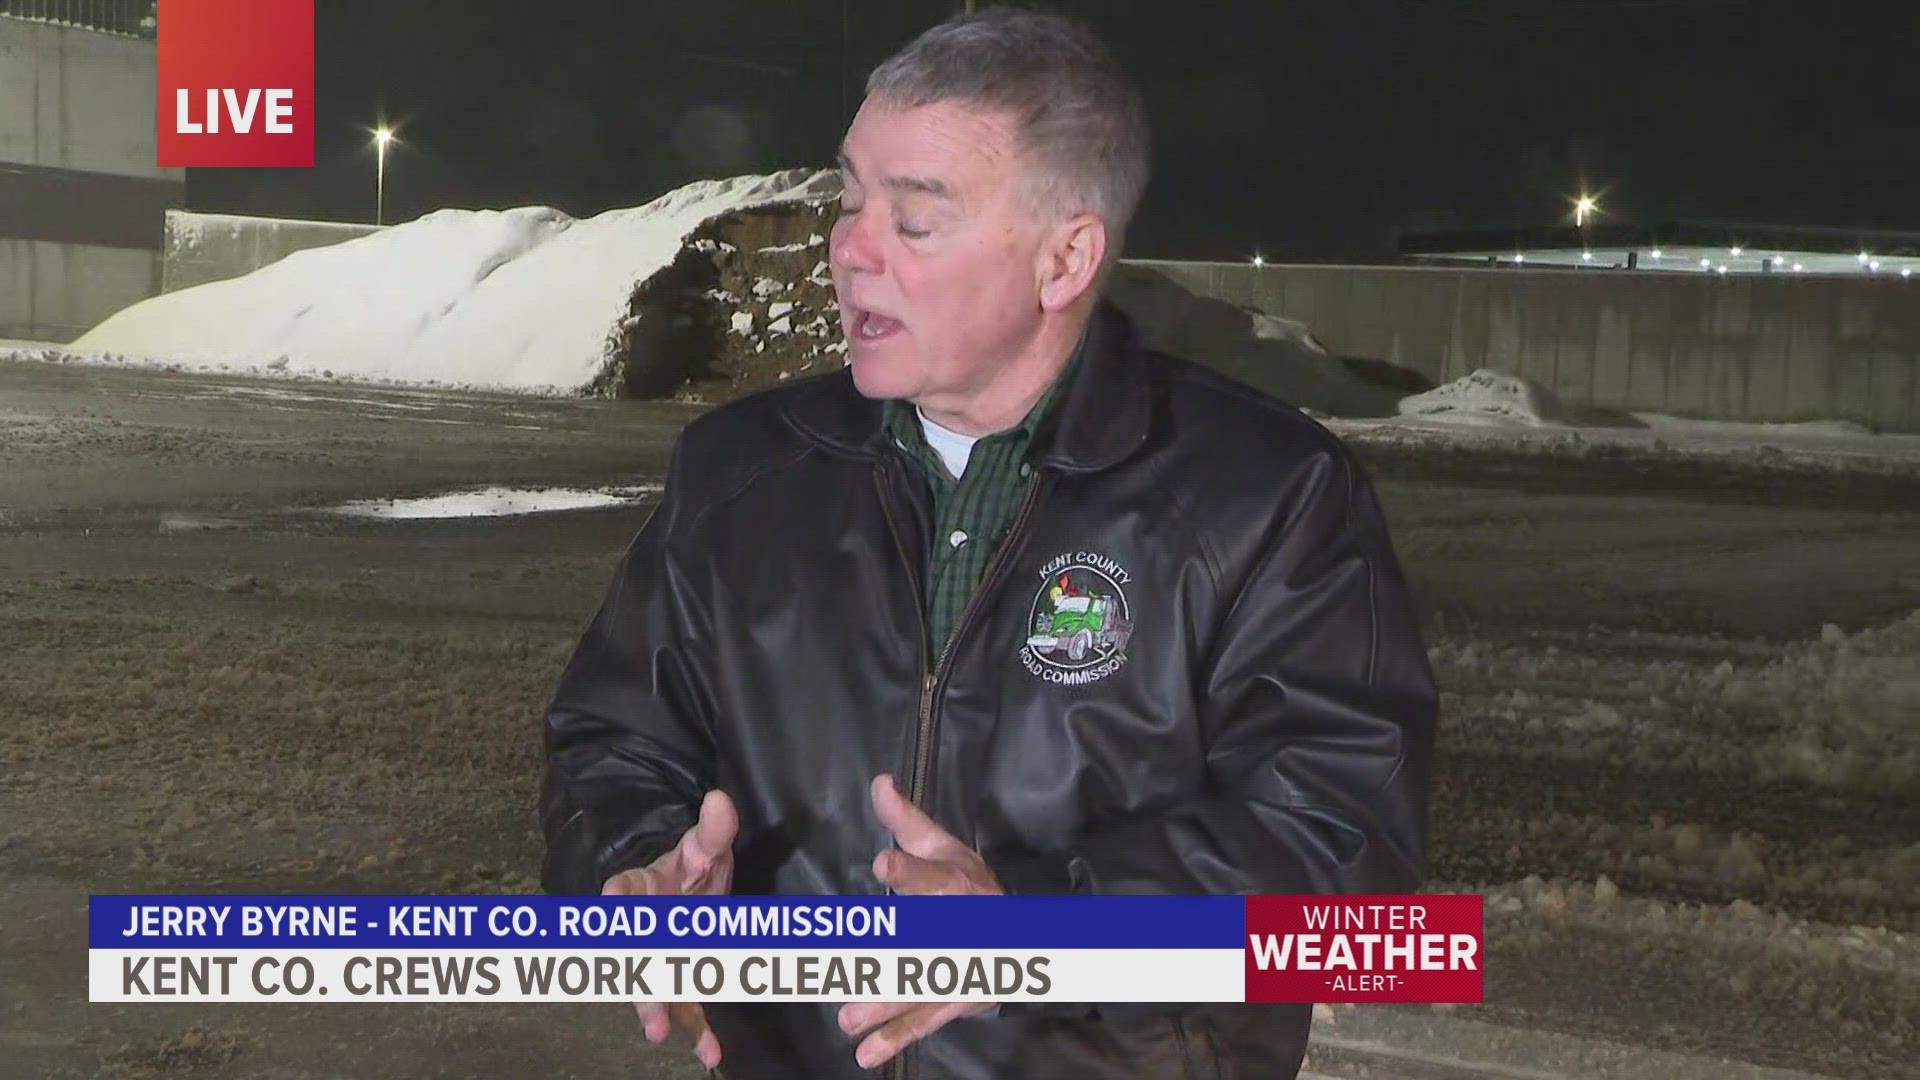 Roads in many areas of West Michigan are slushy due to Tuesday's snowfall. Here's how the Kent County Road Commission is working to keep roads clear.